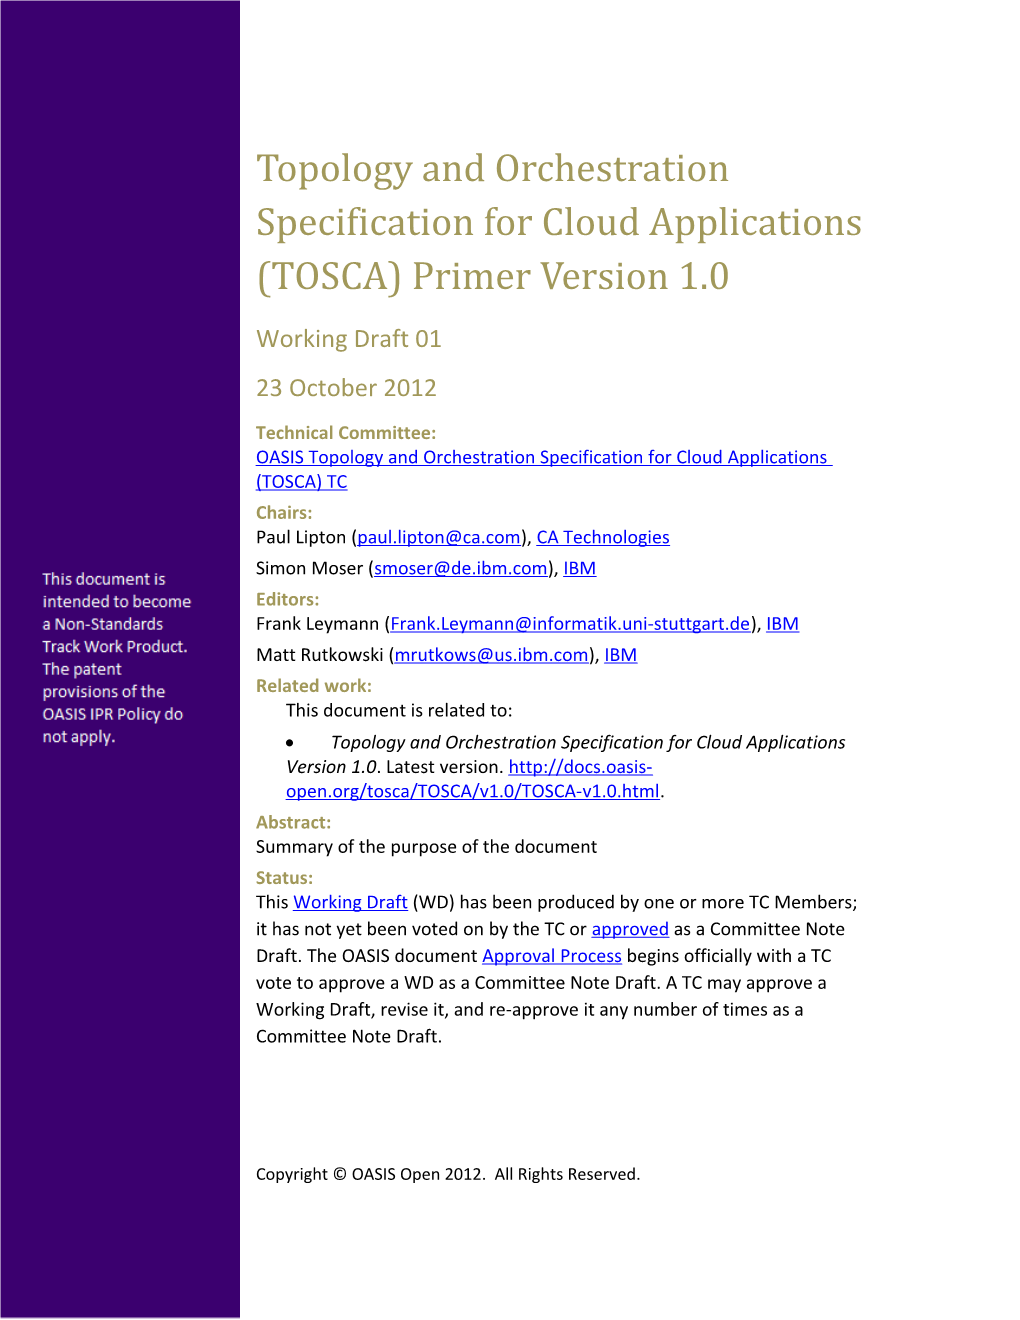 Topology and Orchestration Specification for Cloud Applications (TOSCA) Primer Version 1.0